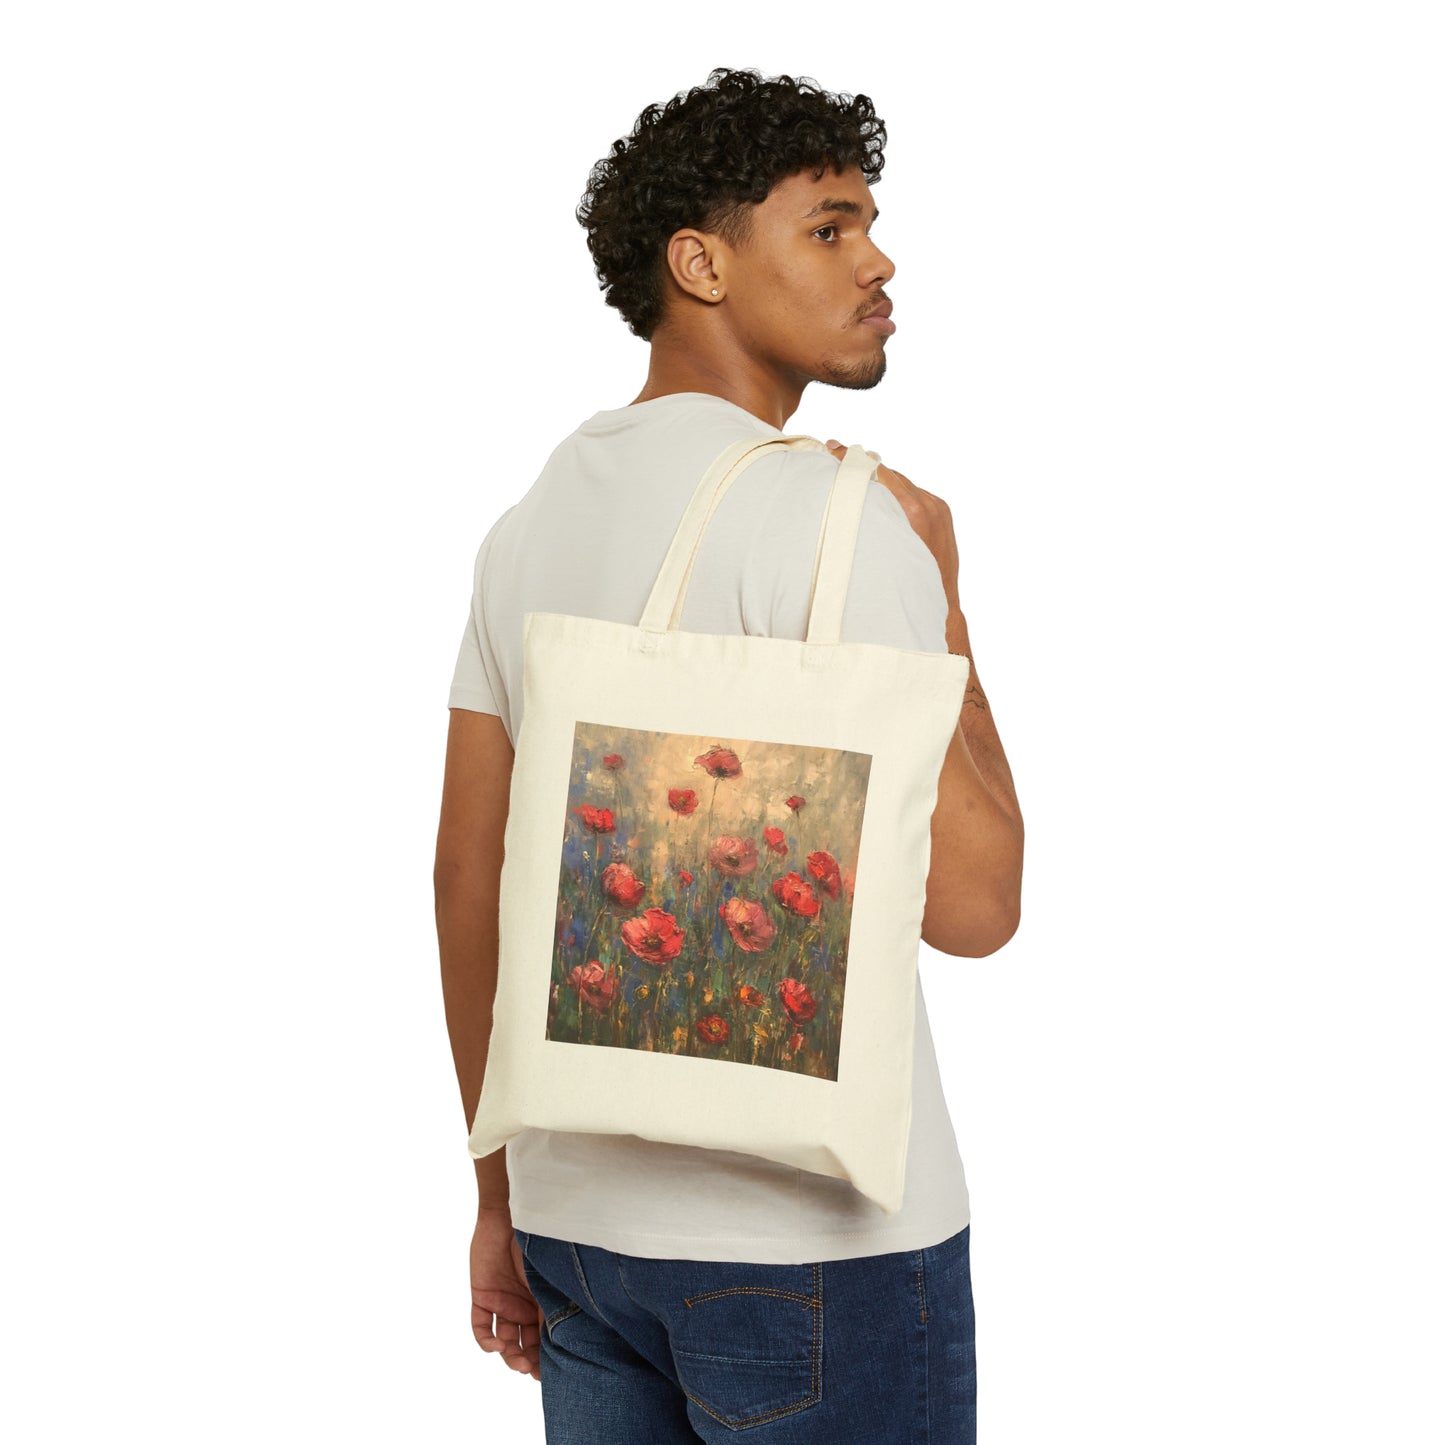 Monet Red Poppies Cotton Canvas Tote Bag